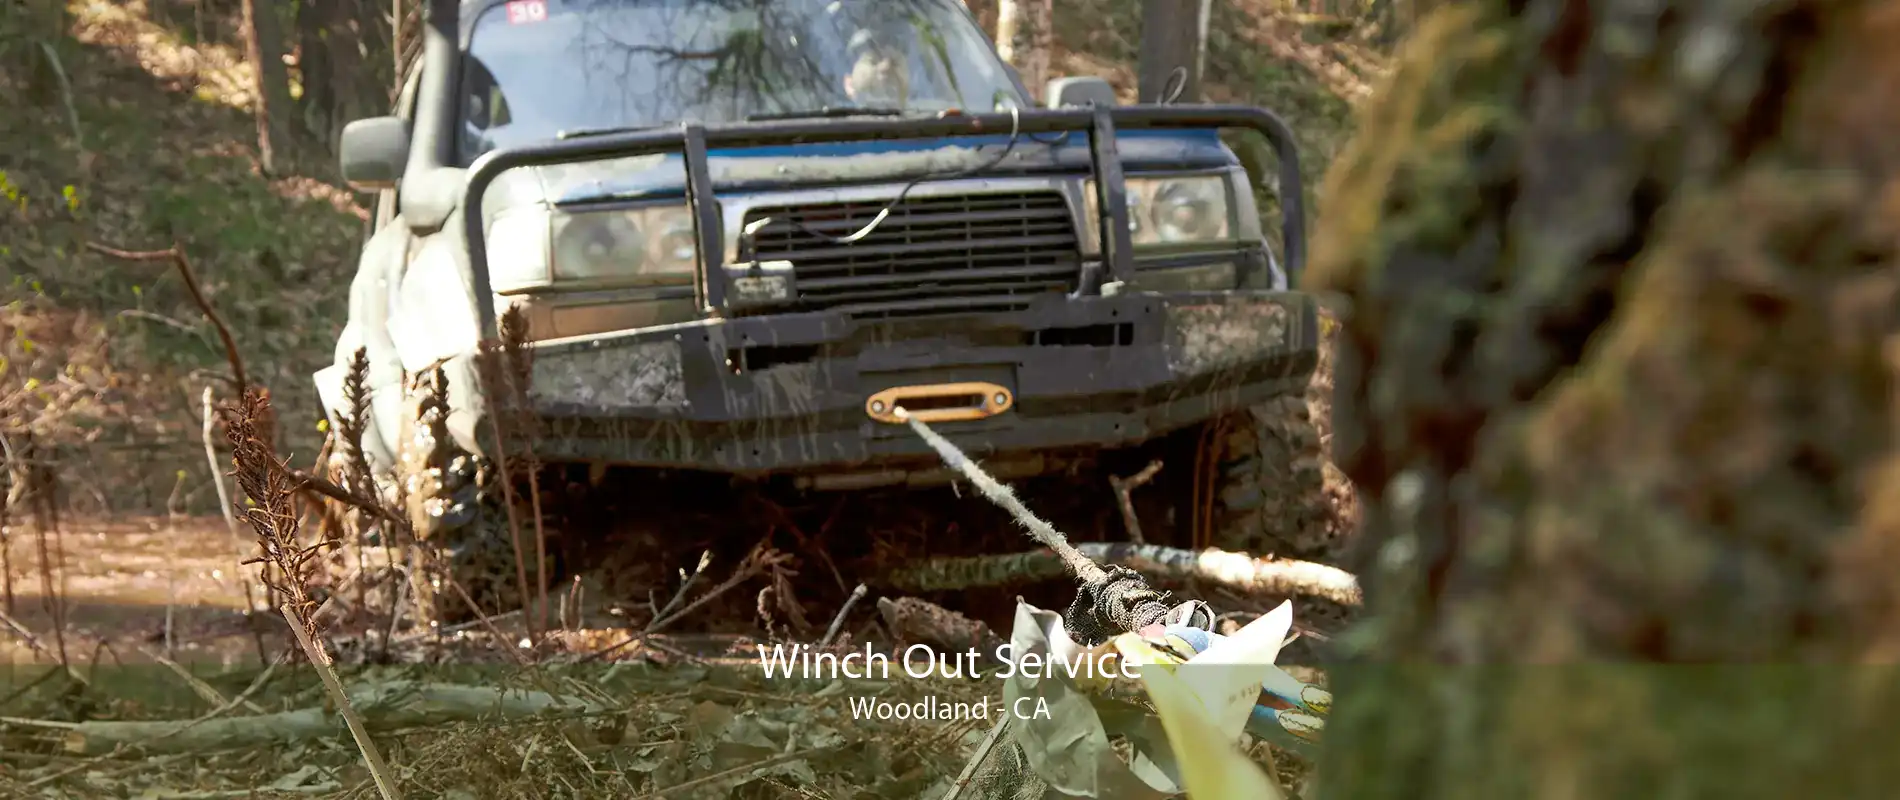 Winch Out Service Woodland - CA